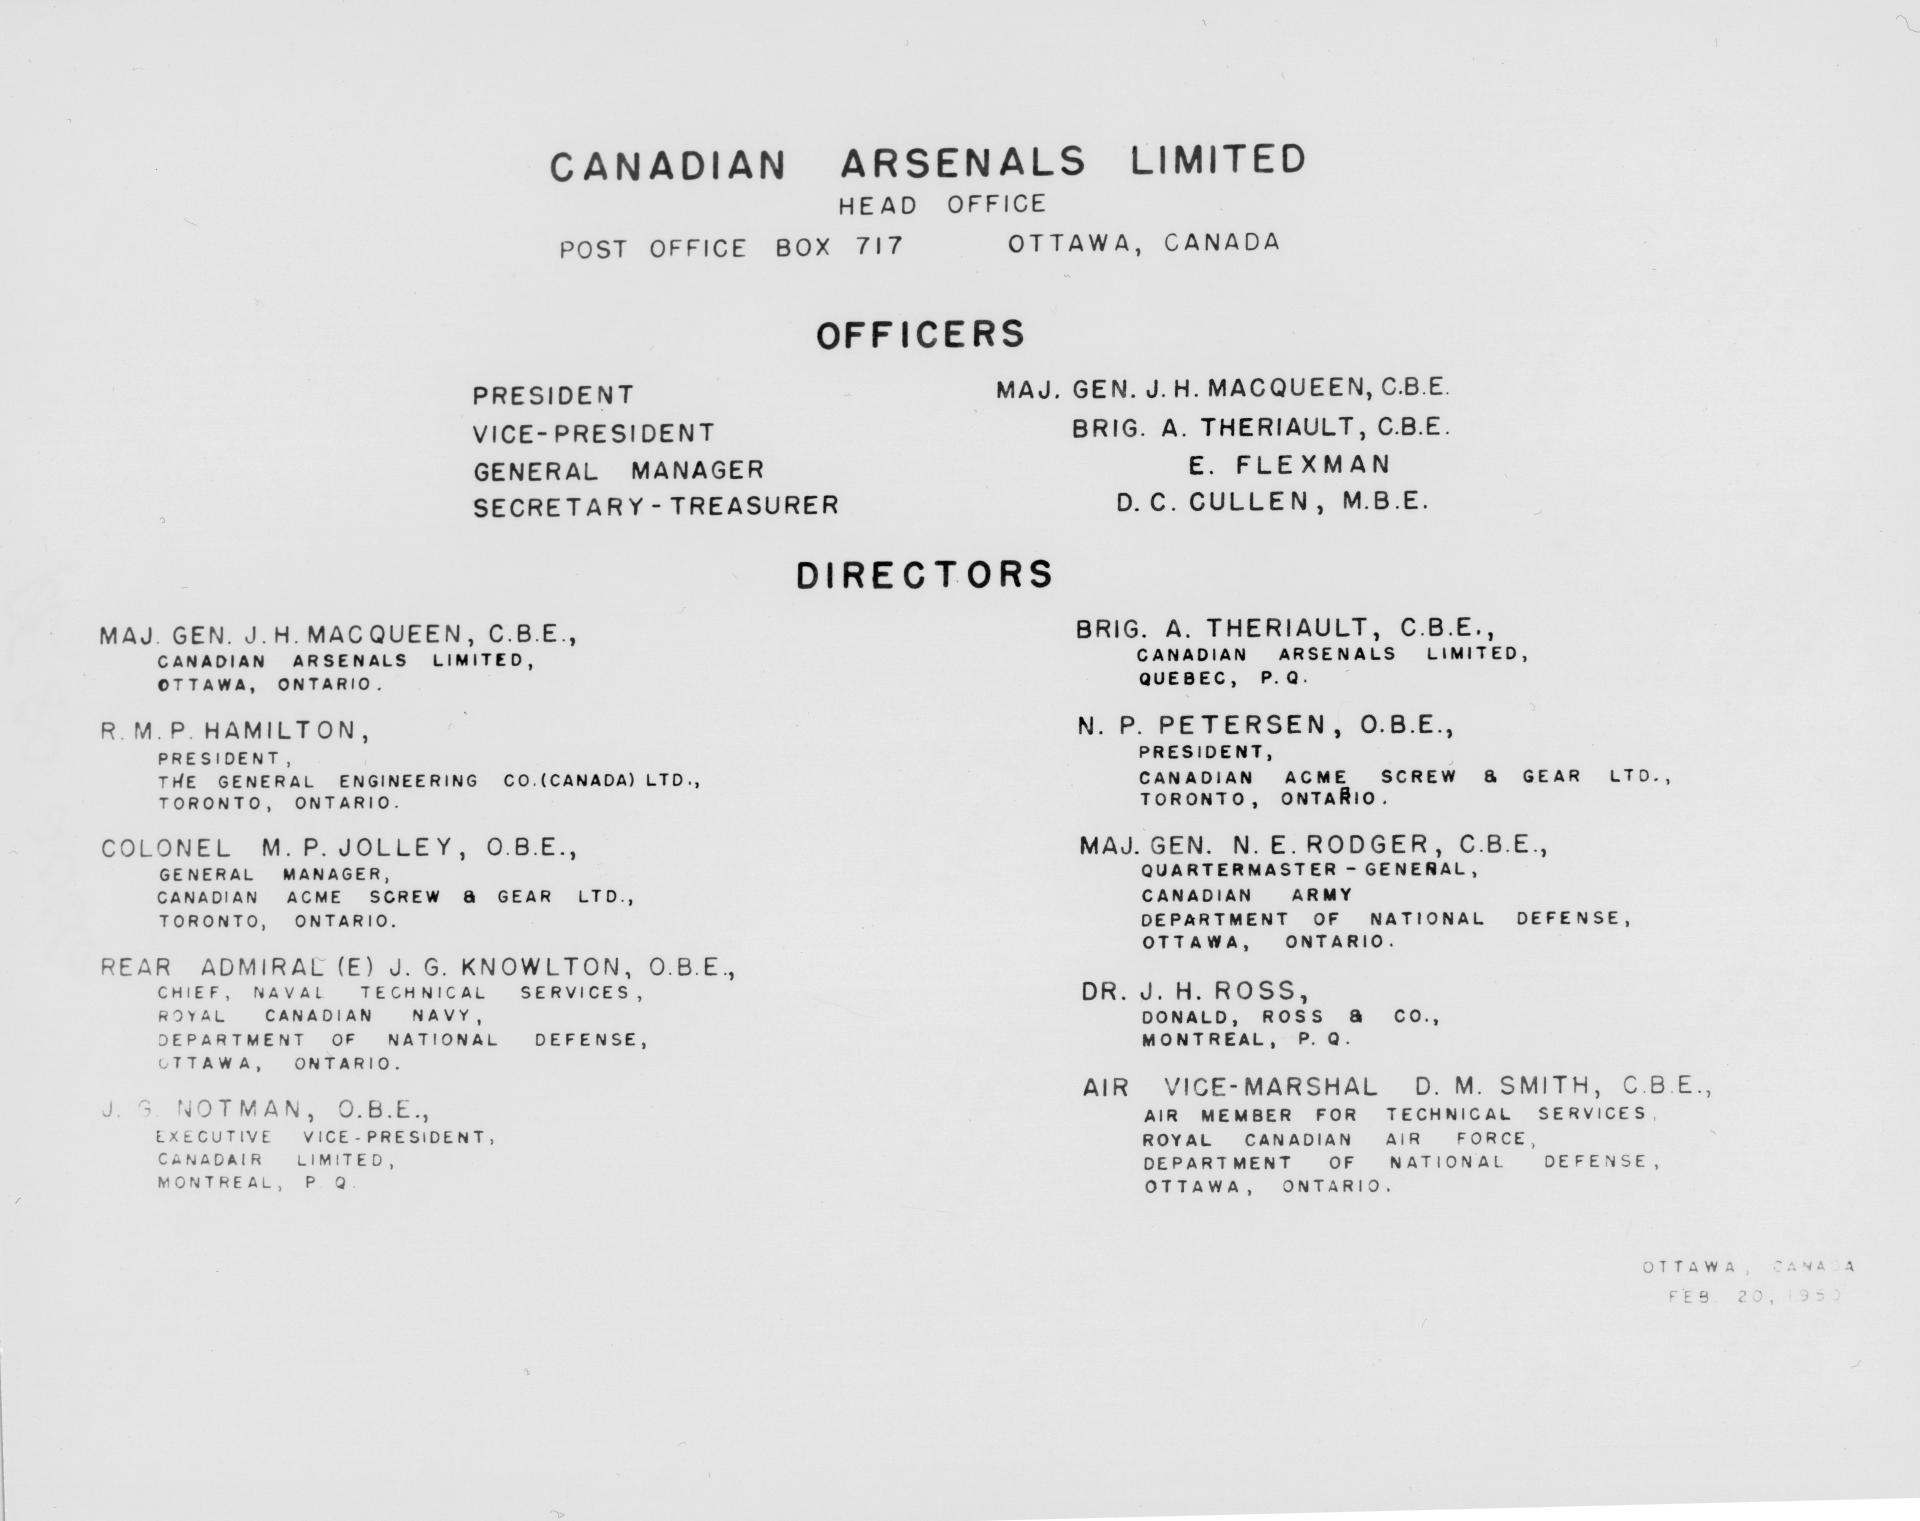 The Board of Directors for Canadian Arsenals Limited